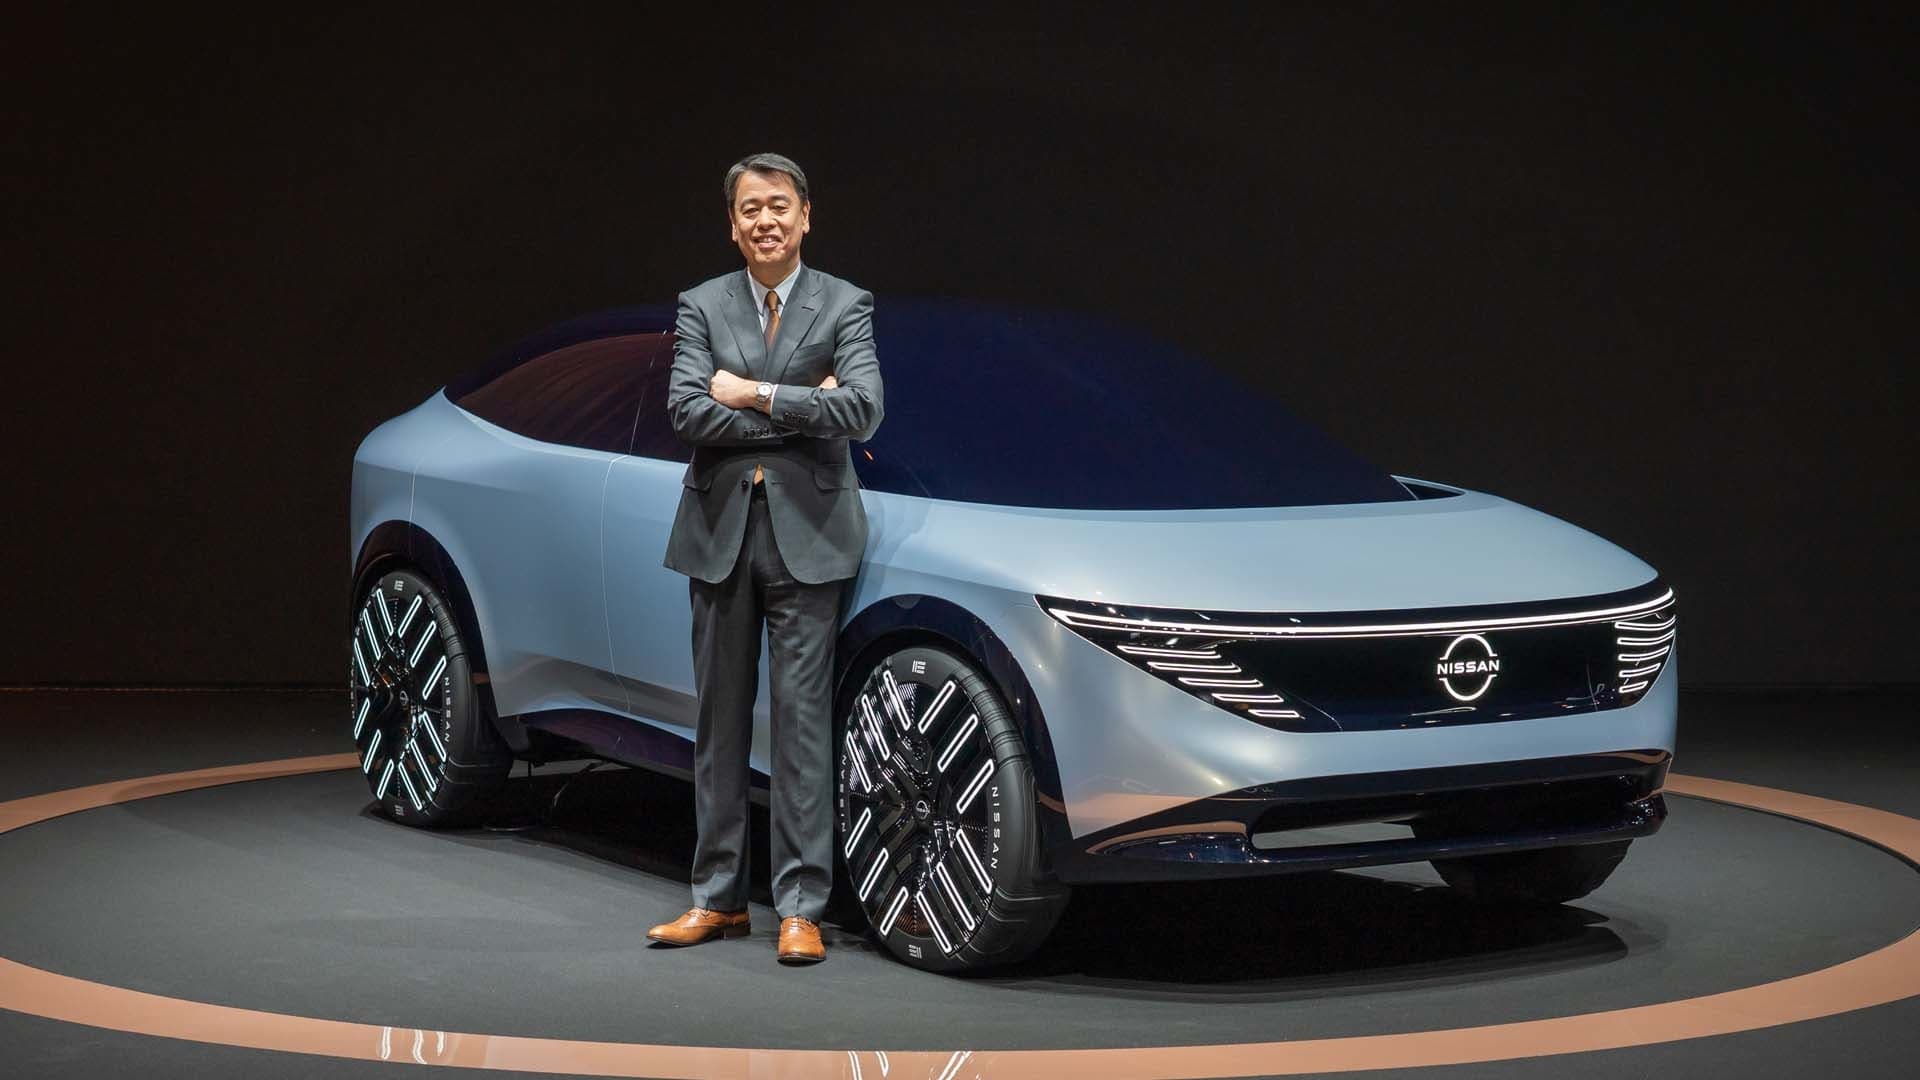 Nissan Will Release 15 New EVs This Decade as Part of $17.6B Investment